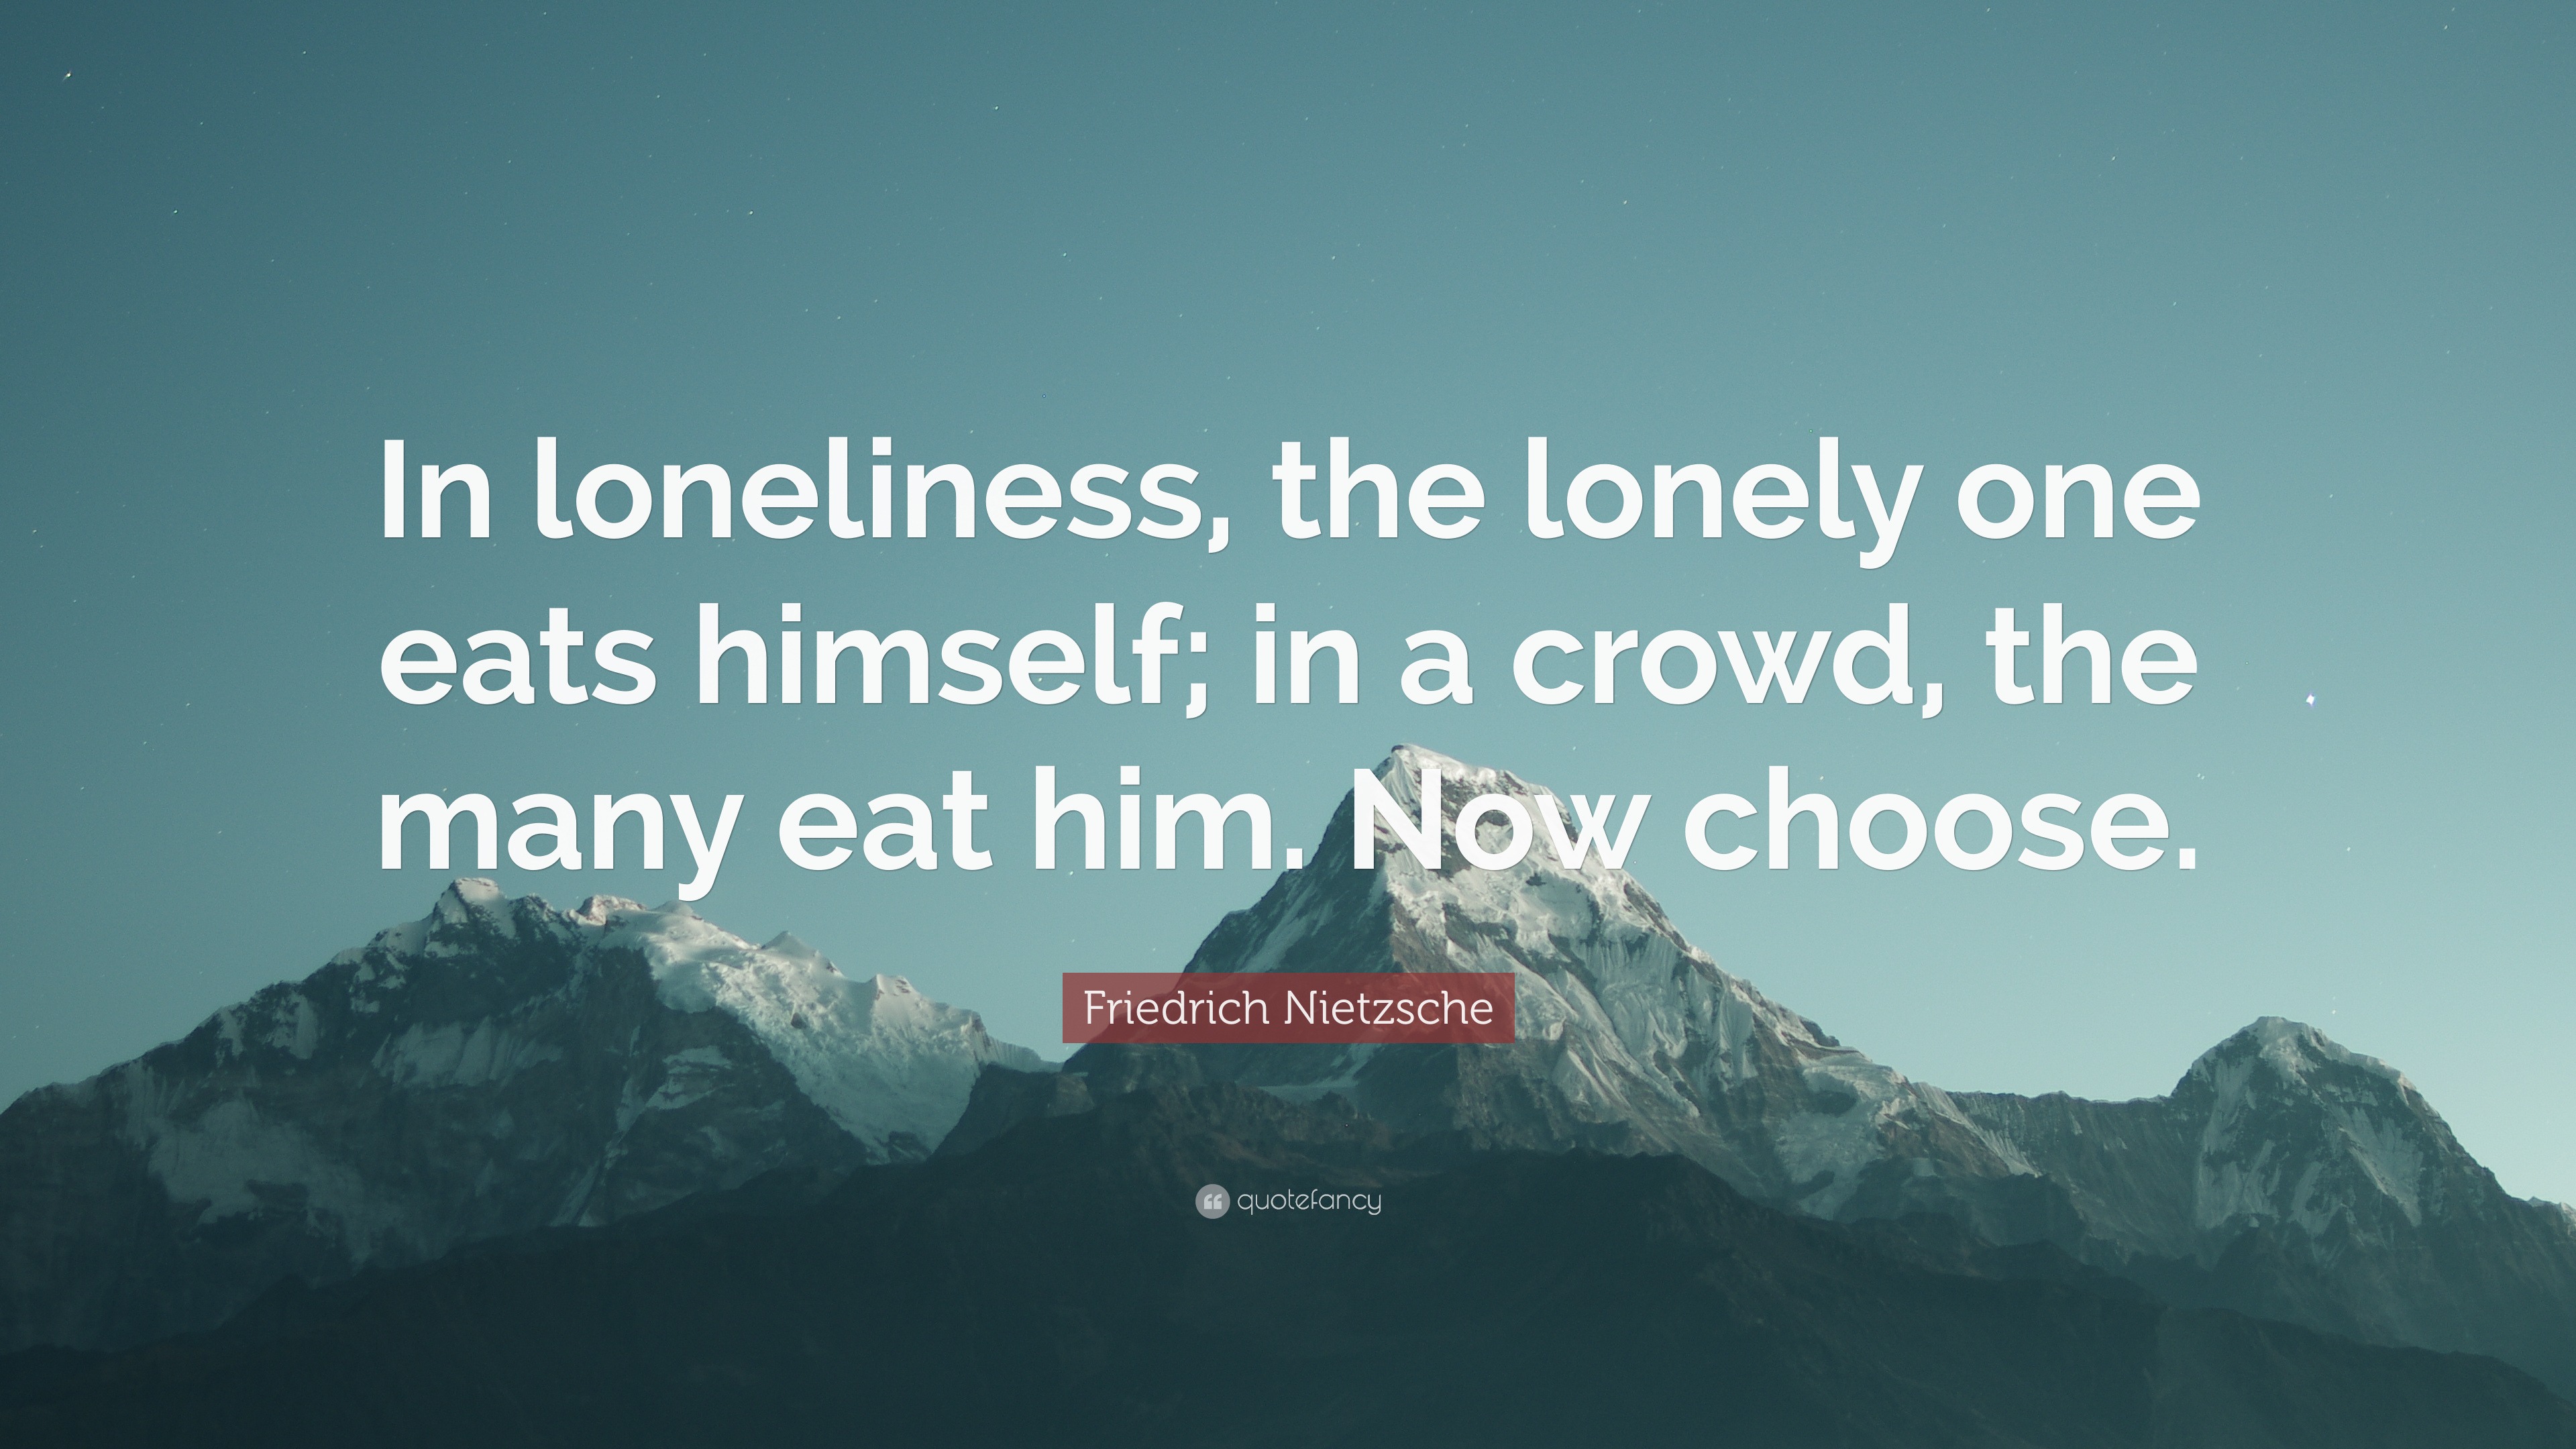 Friedrich Nietzsche Quote: “In loneliness, the lonely one eats himself ...